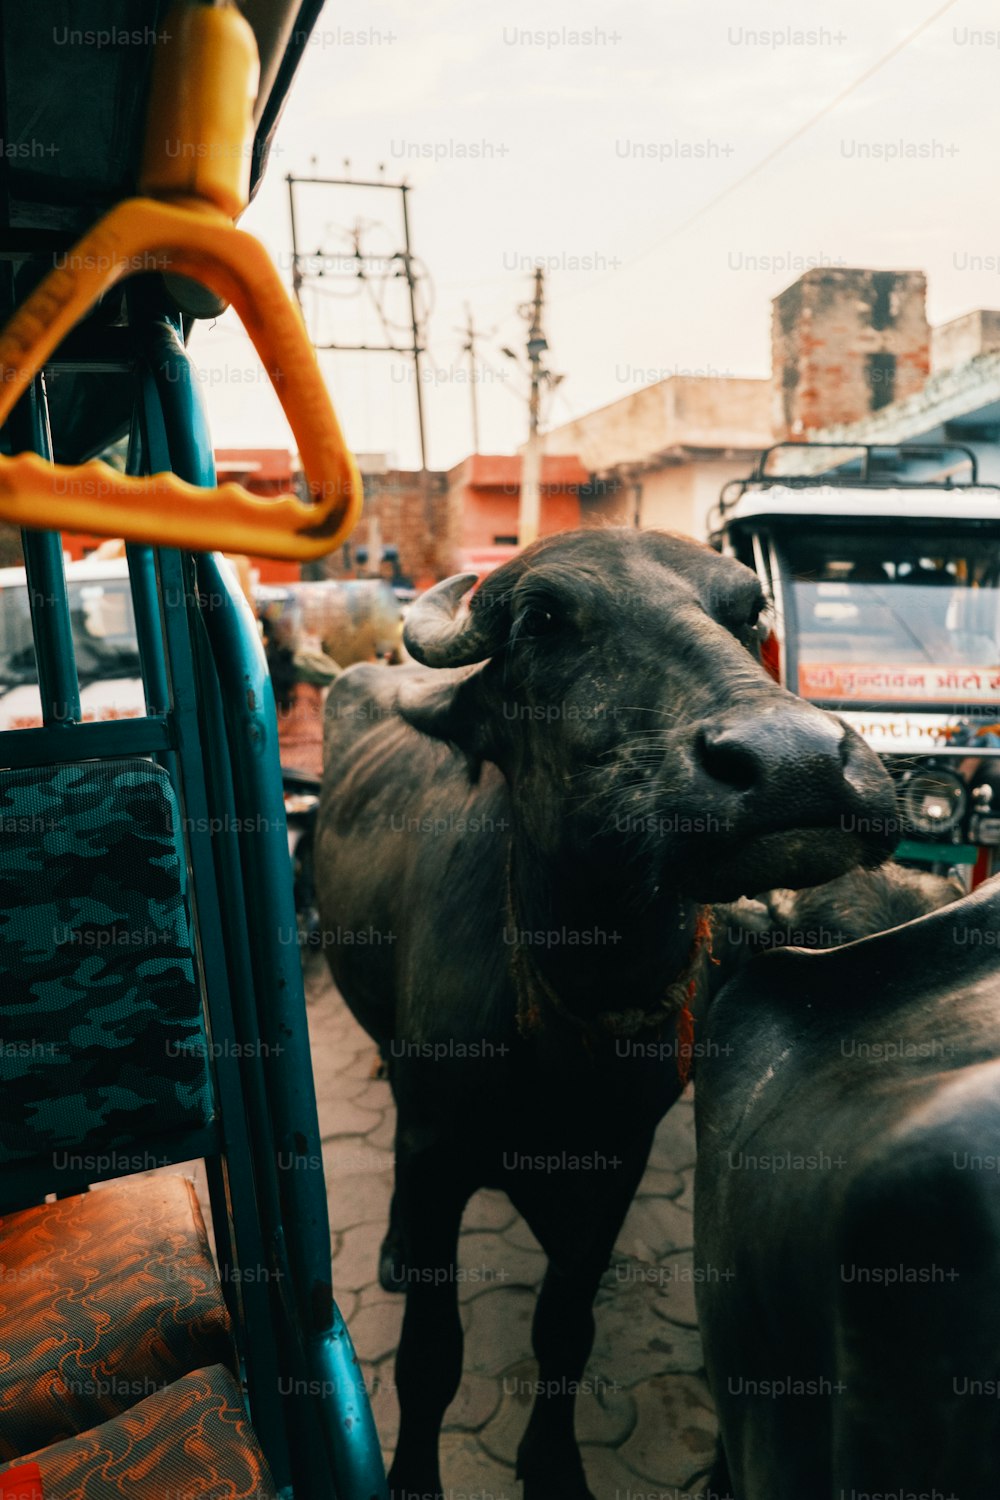 a cow standing next to a bus on a street